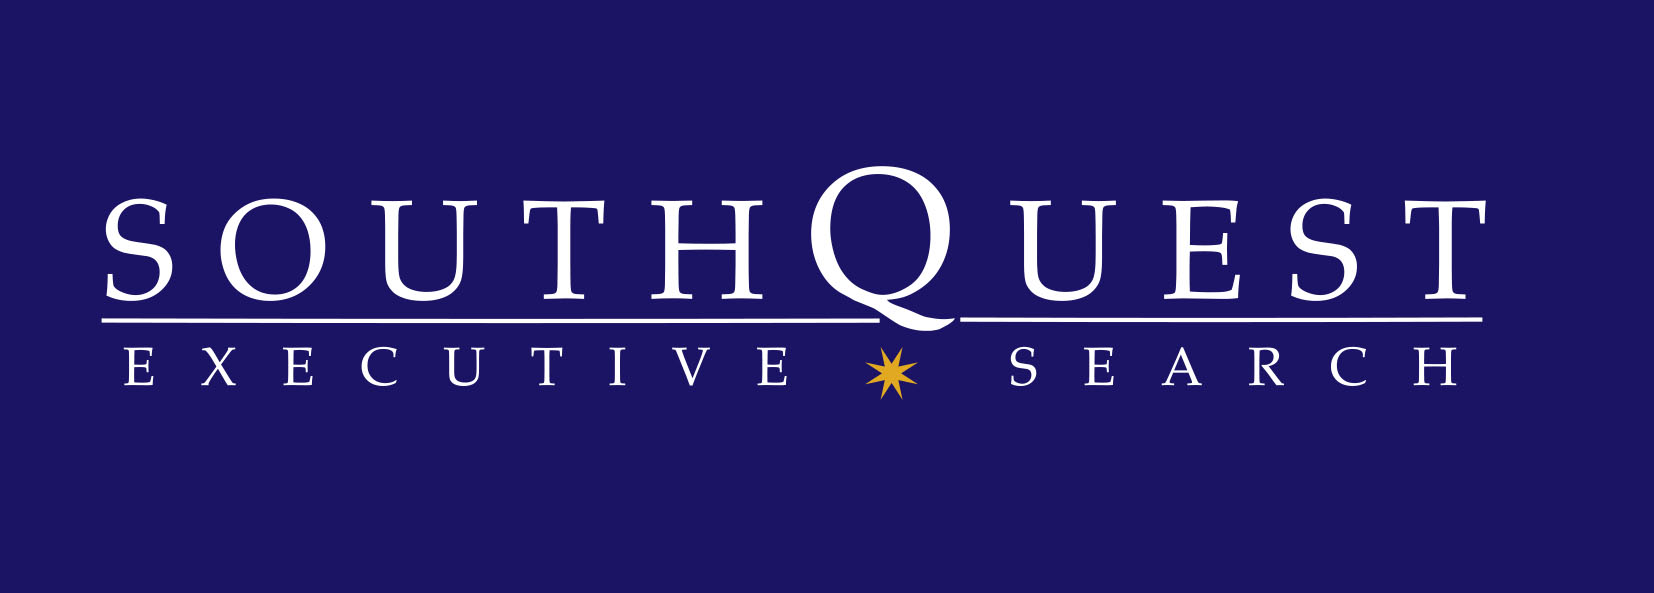 SouthQuest